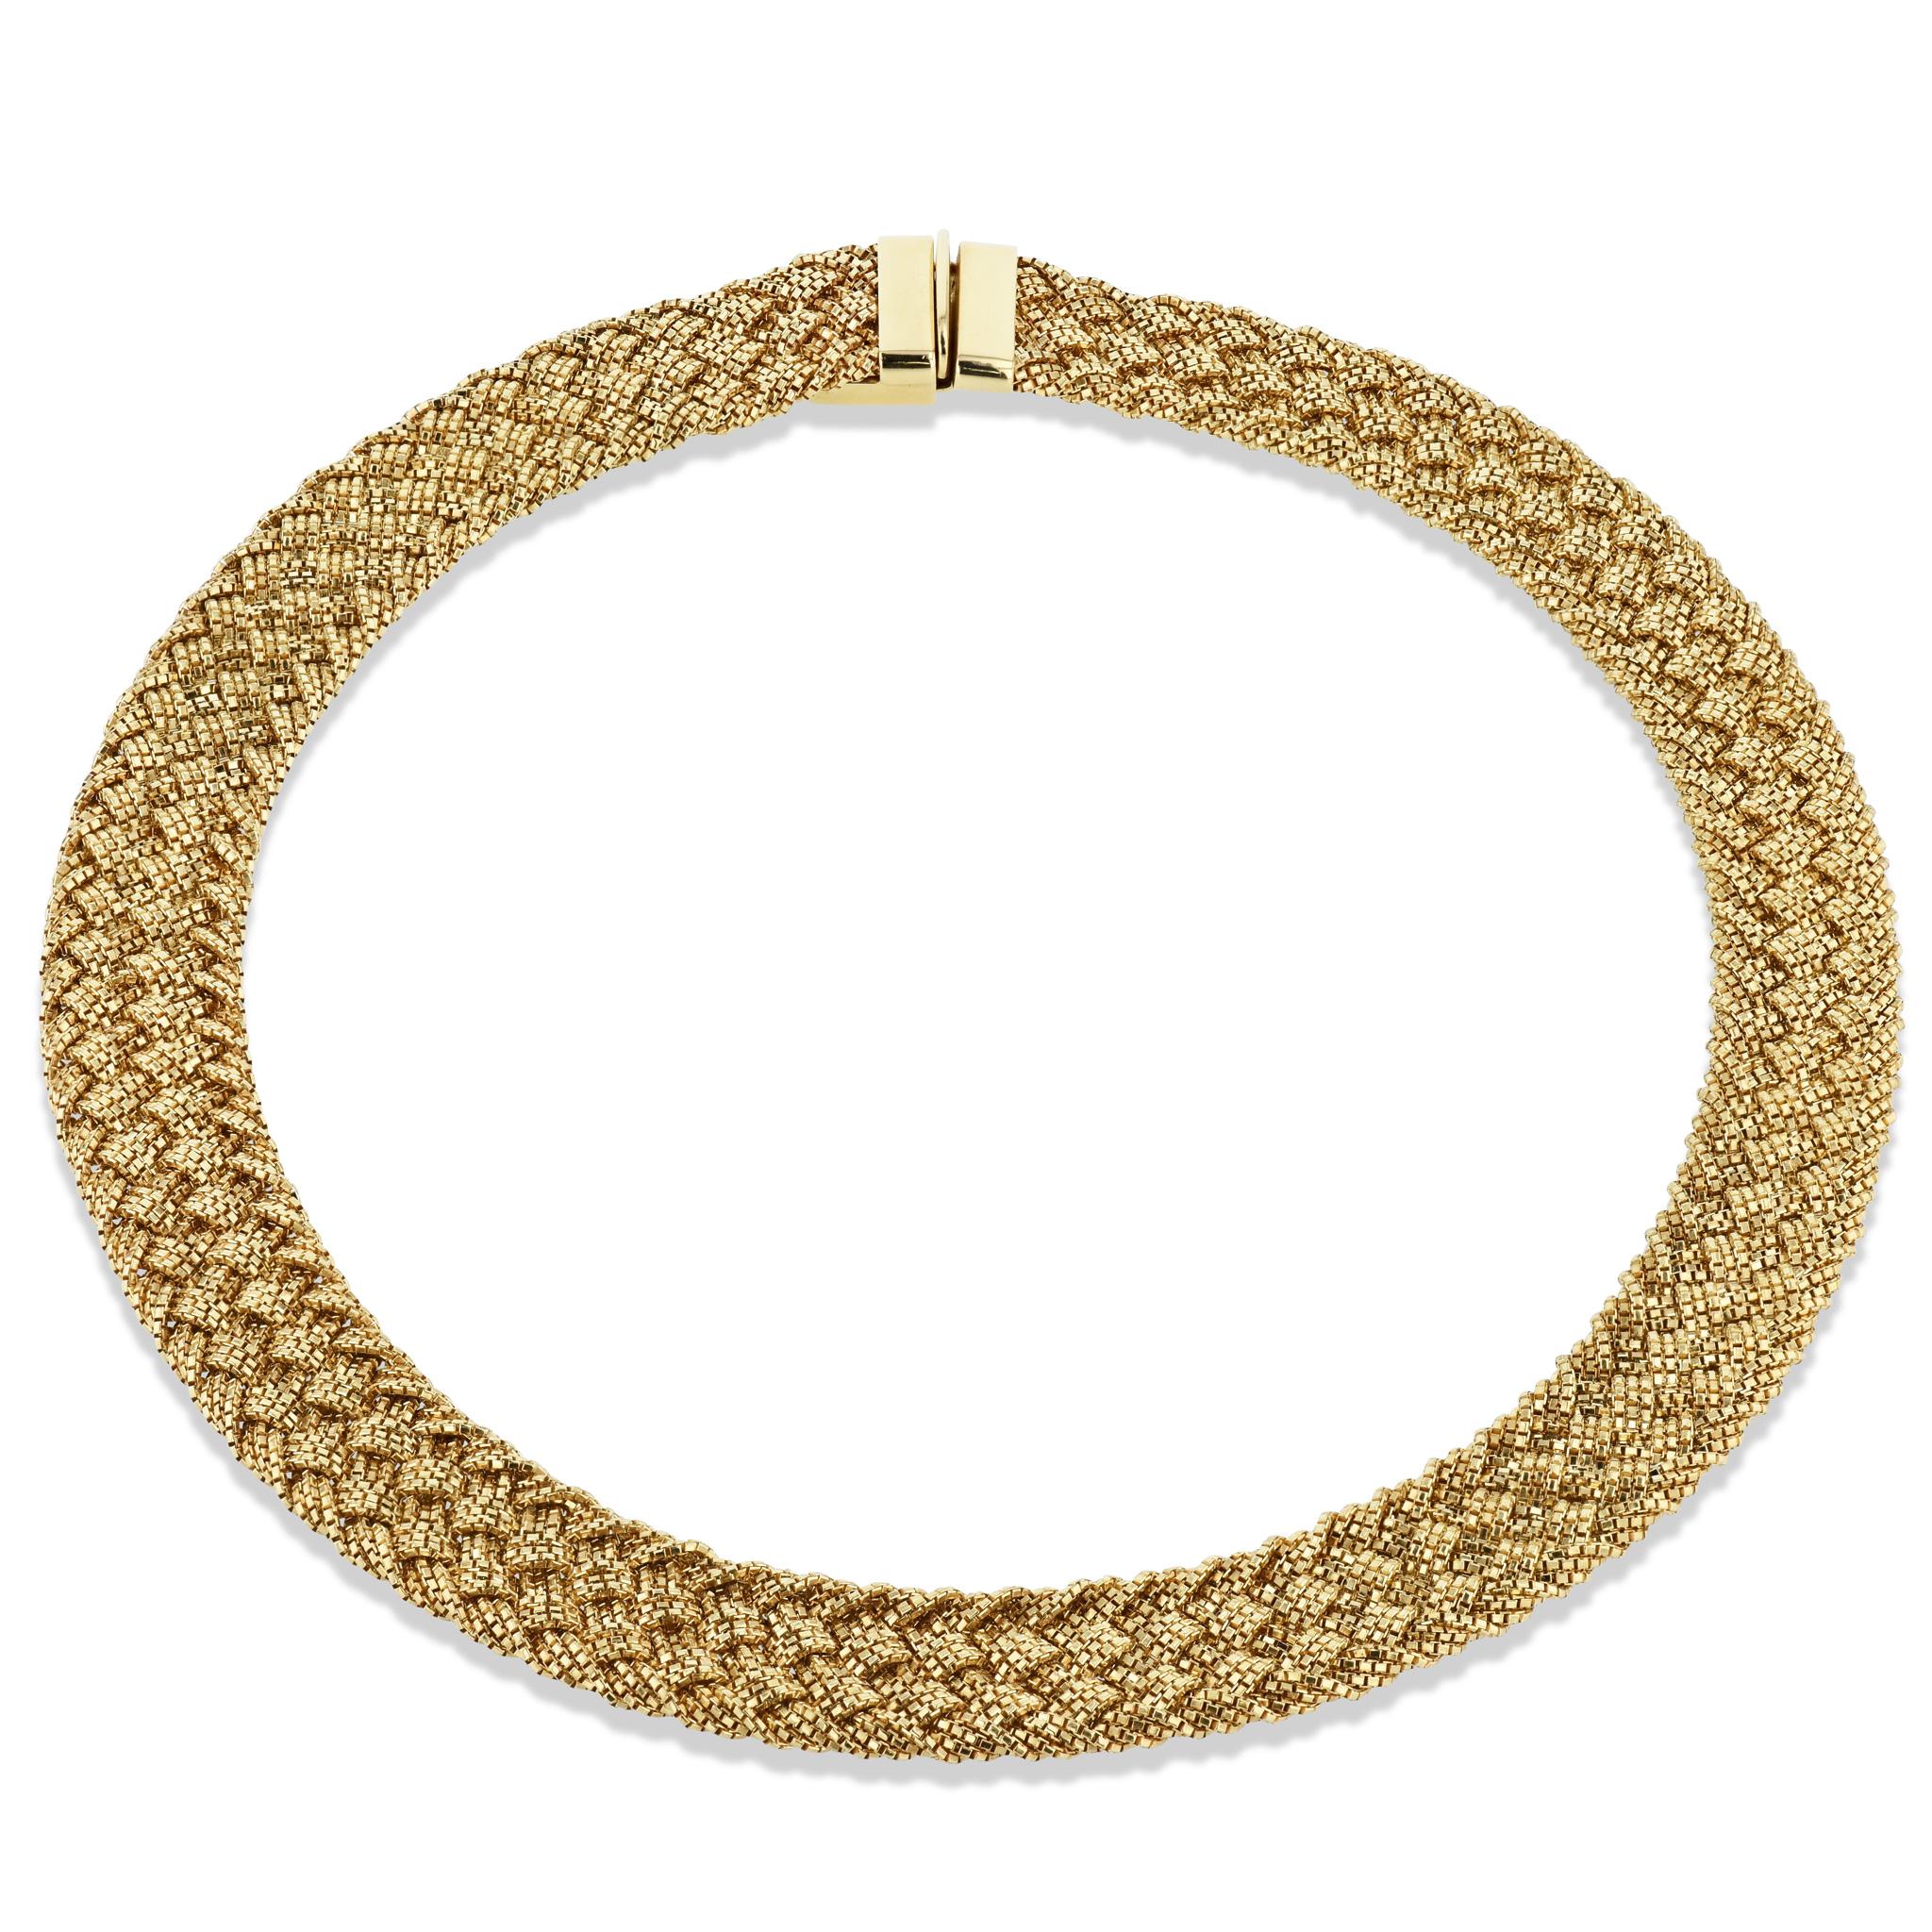 This beautiful Yuri Ichihashi 18 Karat Gold Estate Necklace sparkles with excellence. 
It measures 12.8 mm wide and is 16 inches long. 
It would definitely make a stunning addition to any jewelry collection. 

-Yuri Ichihashi yellow gold estate